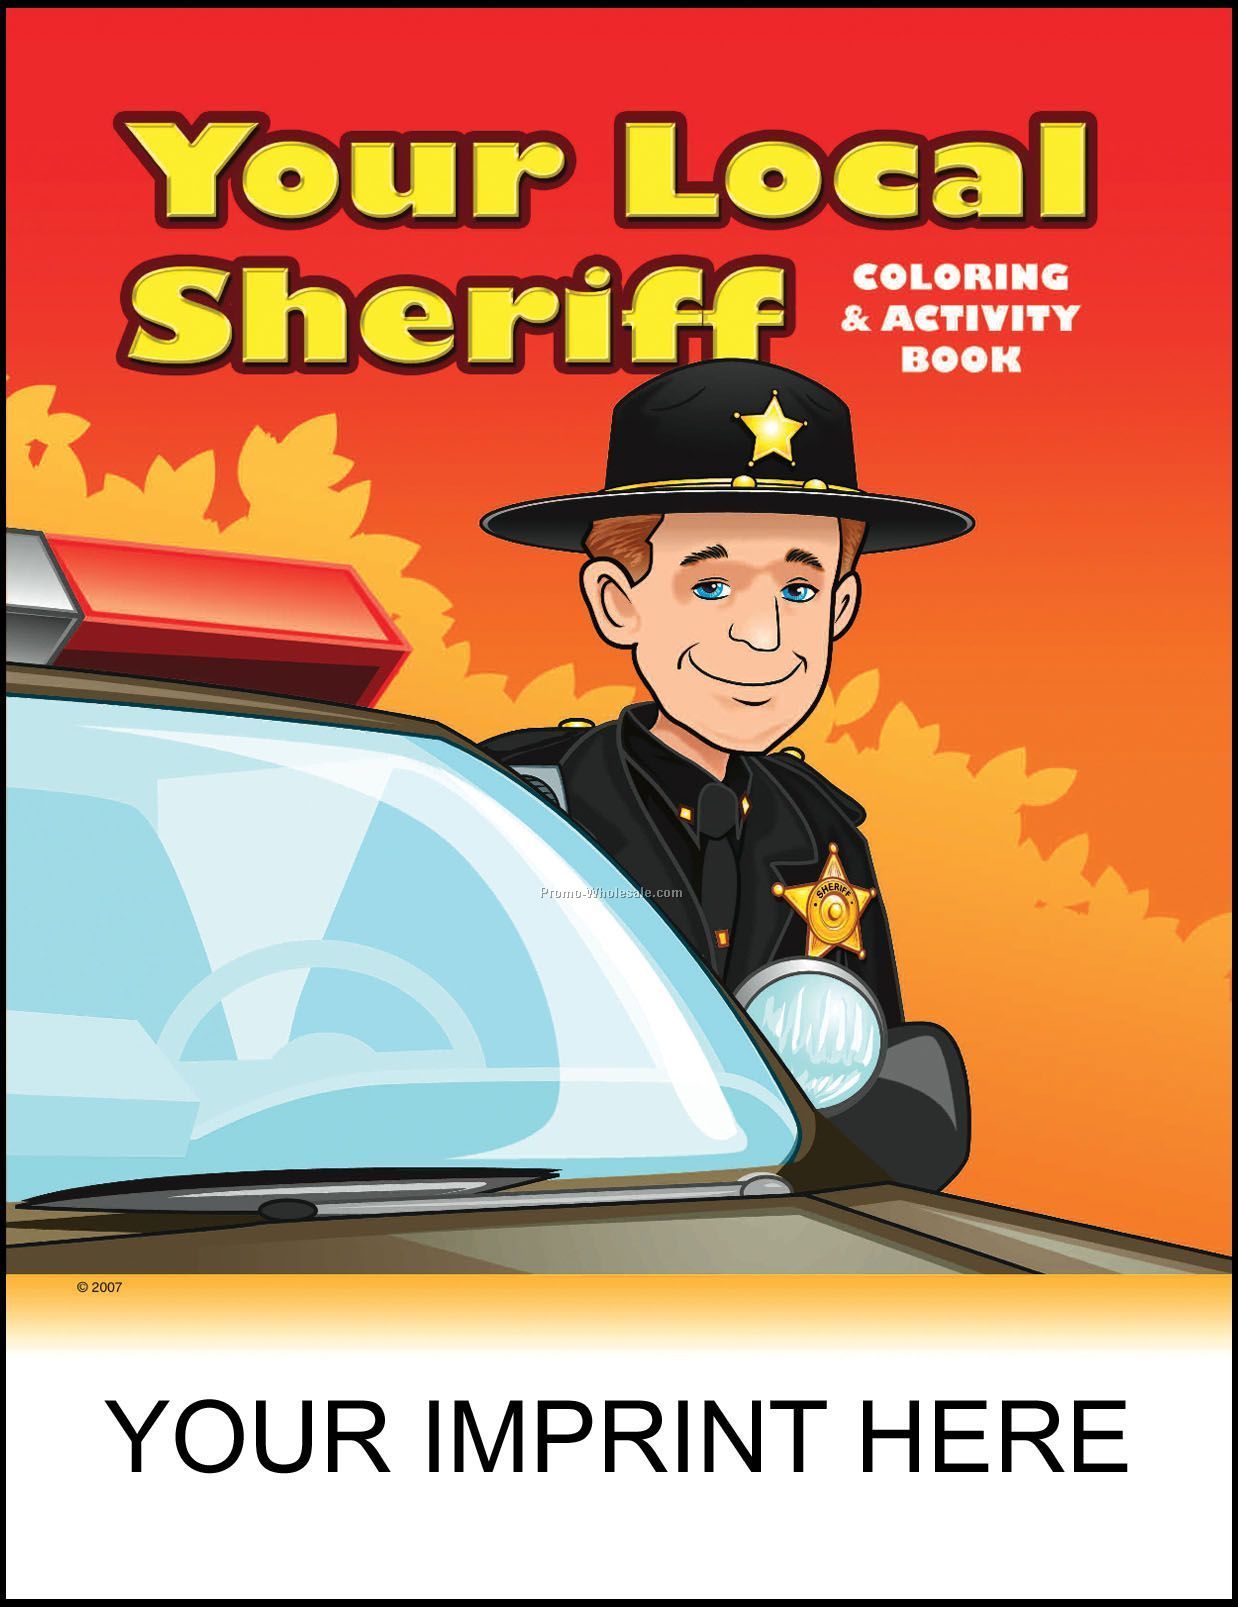 8-3/8"x10-7/8" Your Local Sheriff Coloring & Activity Book